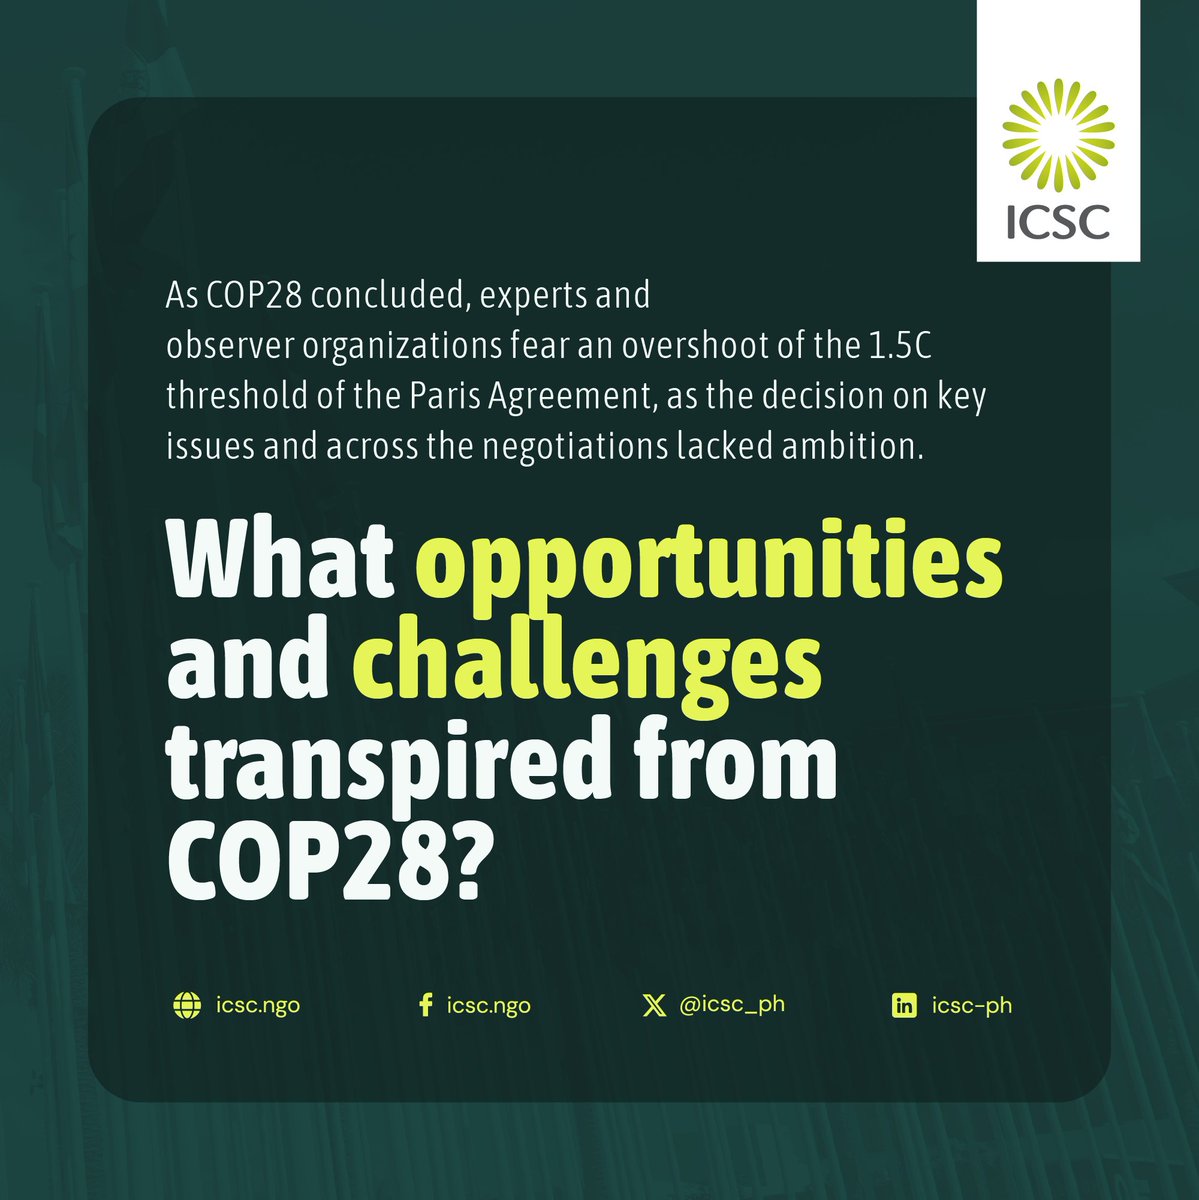 ICSC joined this year’s #COP28 in Dubai, UAE, actively participating in discussions and activities on the #GlobalStocktake (GST), #Adaptation and #Mitigation, #Energy, #ClimateFinance, #LossAndDamage, and innovative #ClimateAction.